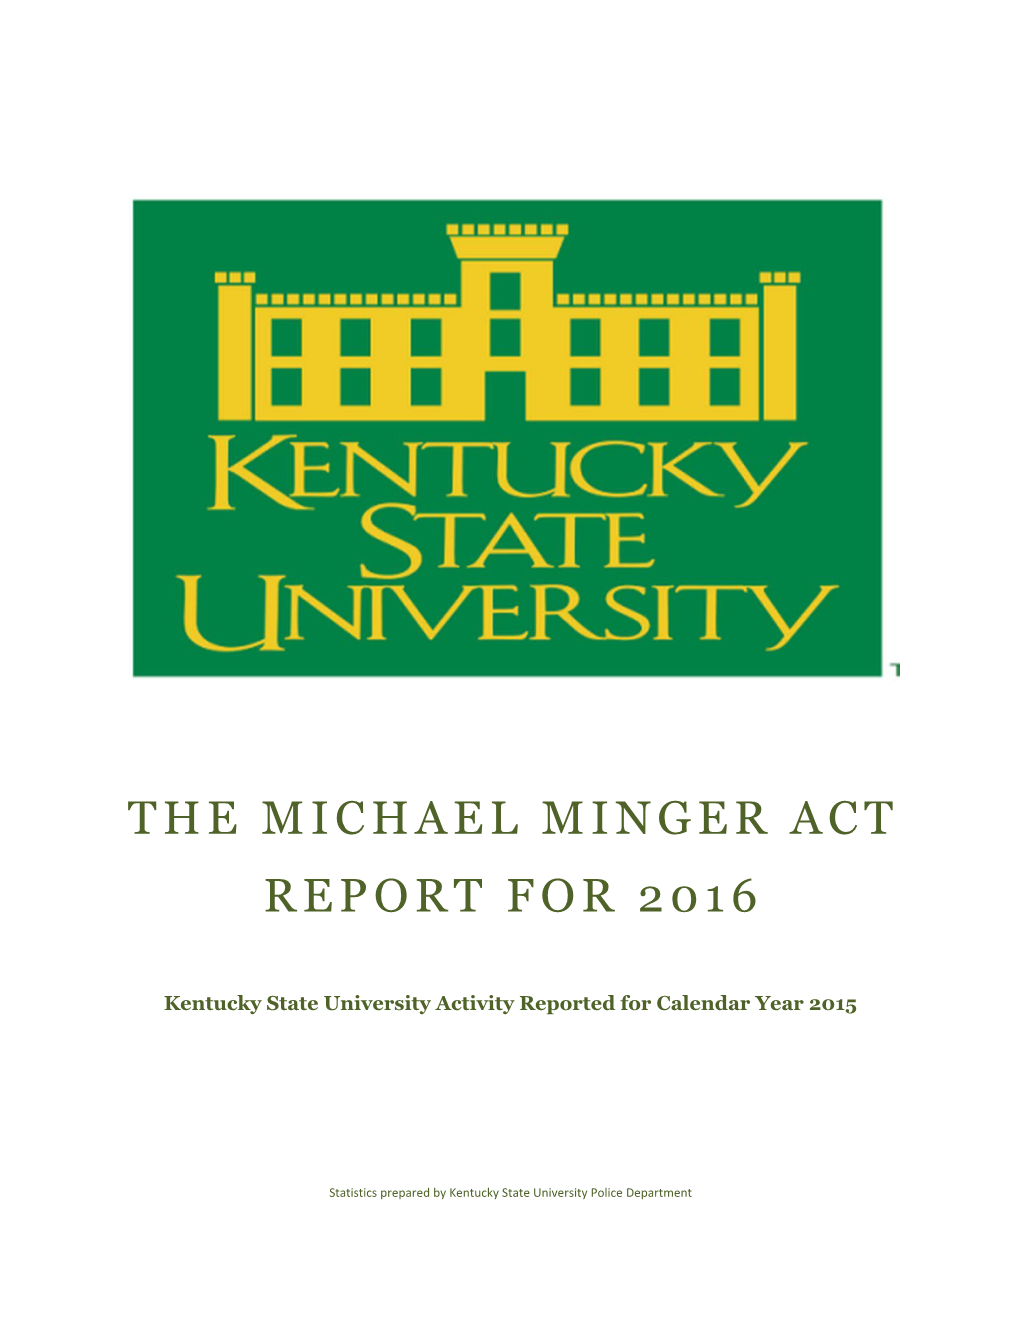 Kentucky State University Activity Reported for Calendar Year 2015